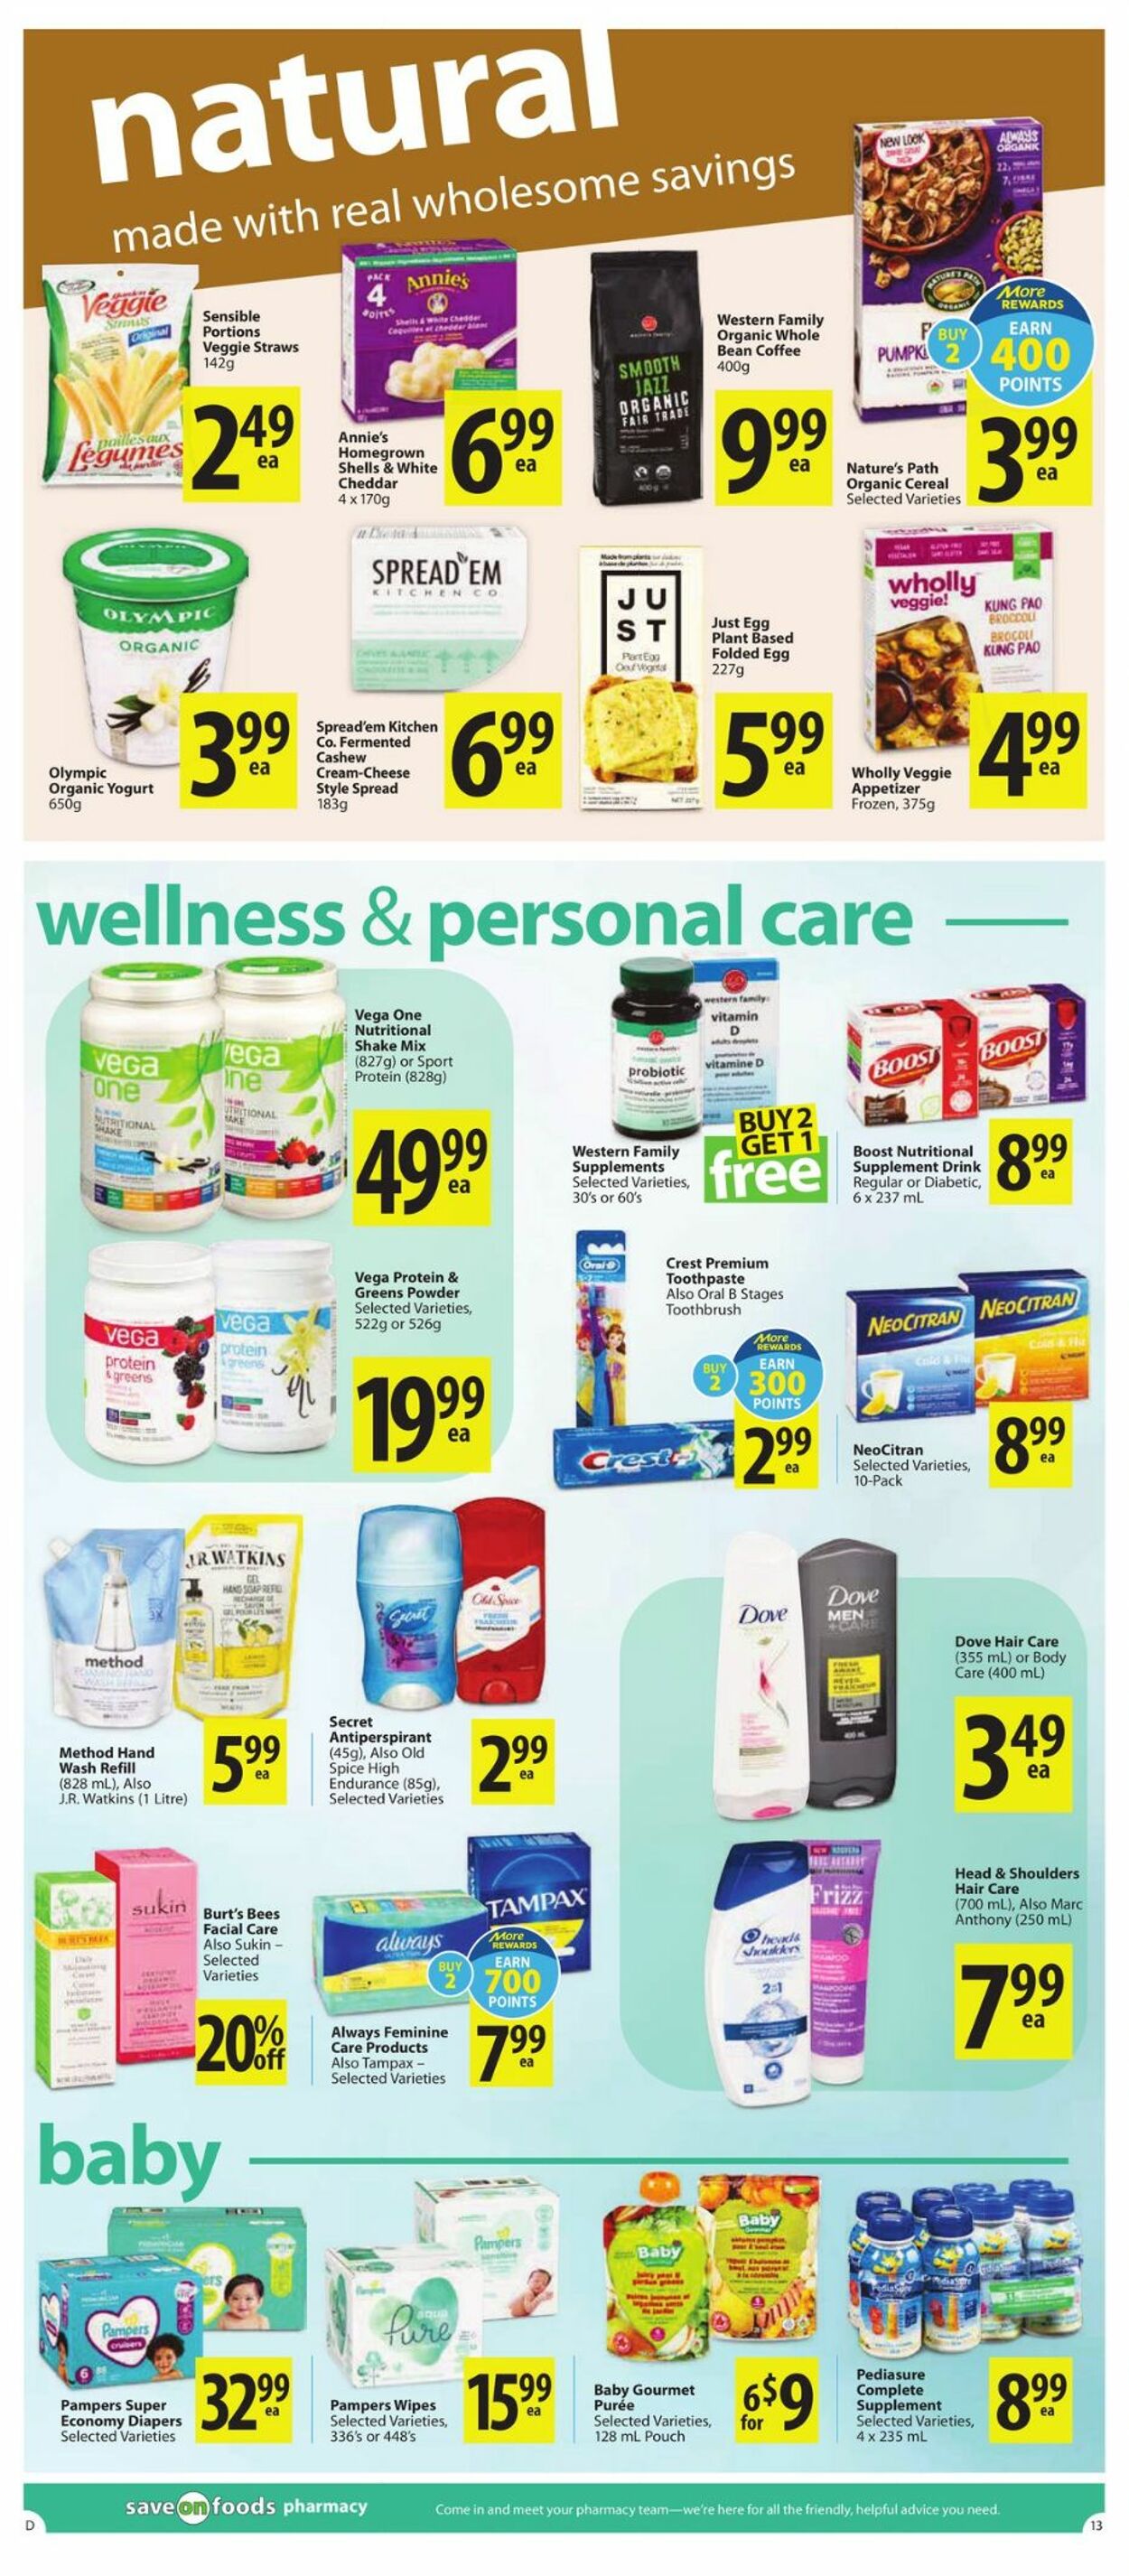 Circulaire Save-On-Foods 30.09.2021 - 06.10.2021